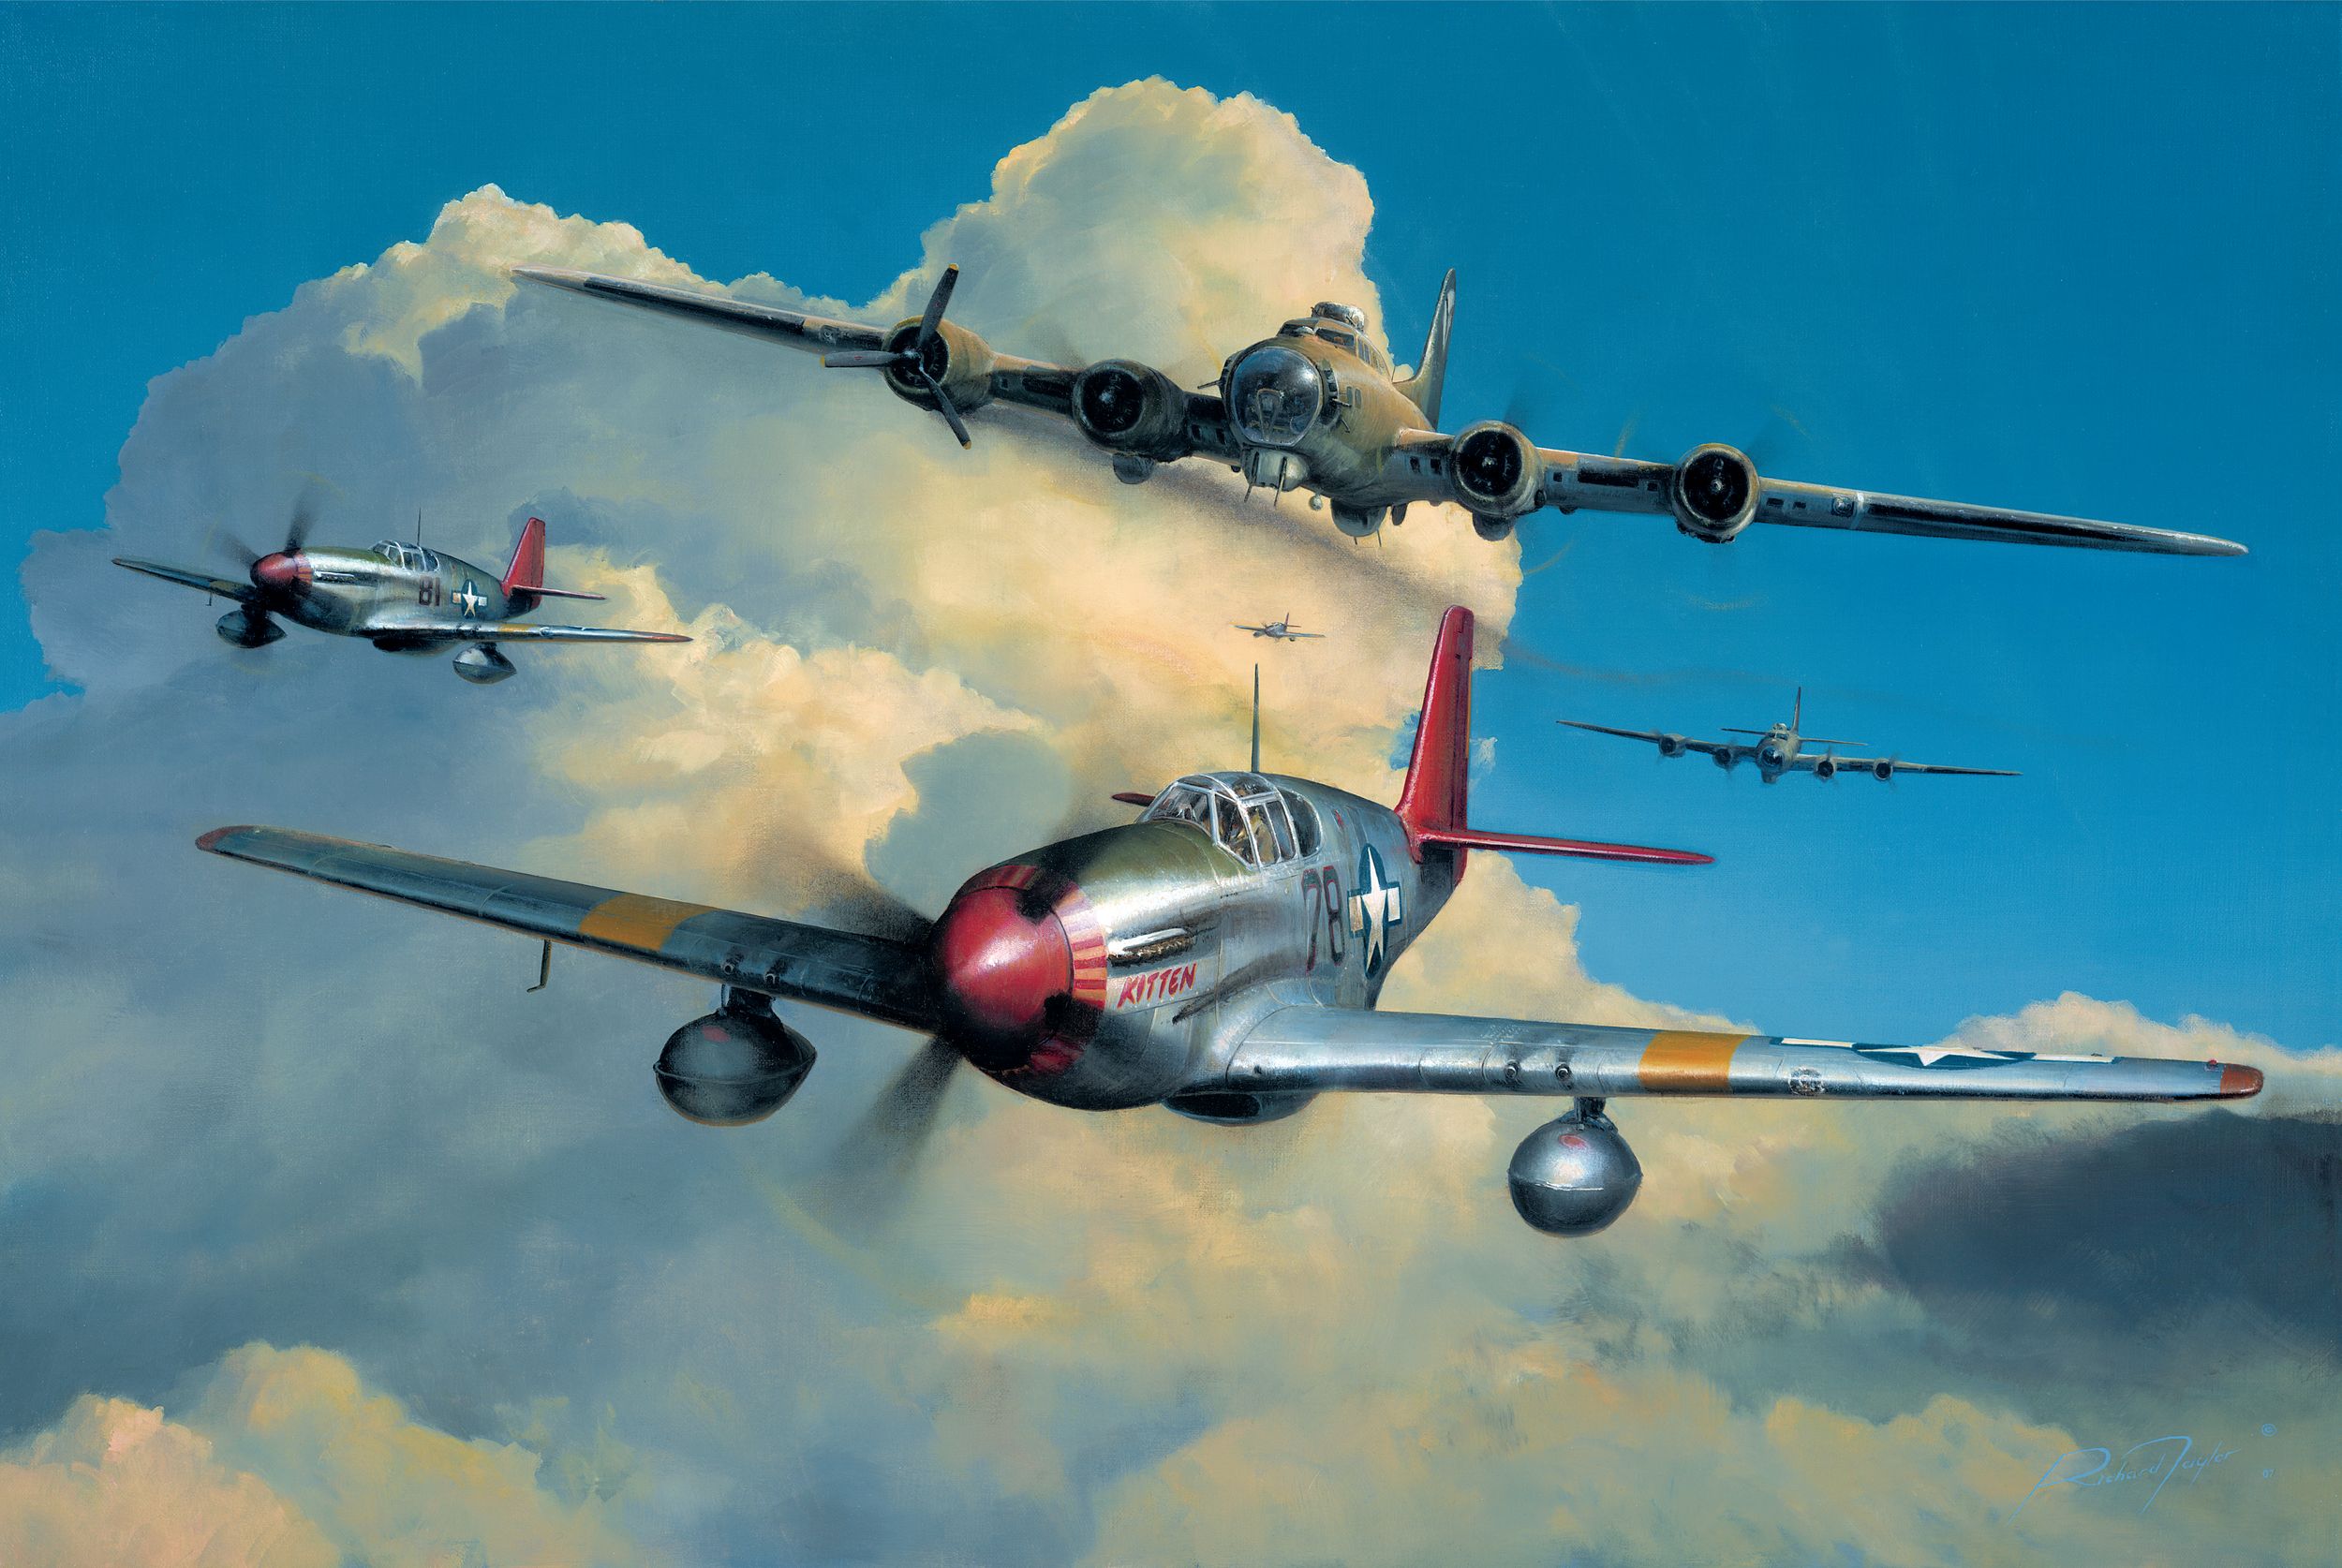 In Richard Taylor’s striking new painting, the Tuskegee “Red Tail” pilots of the 332nd Fighter Group are shown escorting a damaged B-17 Flying Fortress of the 483rd Bomb Group to its home base in Italy, summer 1944. Skin color made no difference to the bomber pilots when their “little friends” came up to escort them on their bombing missions.